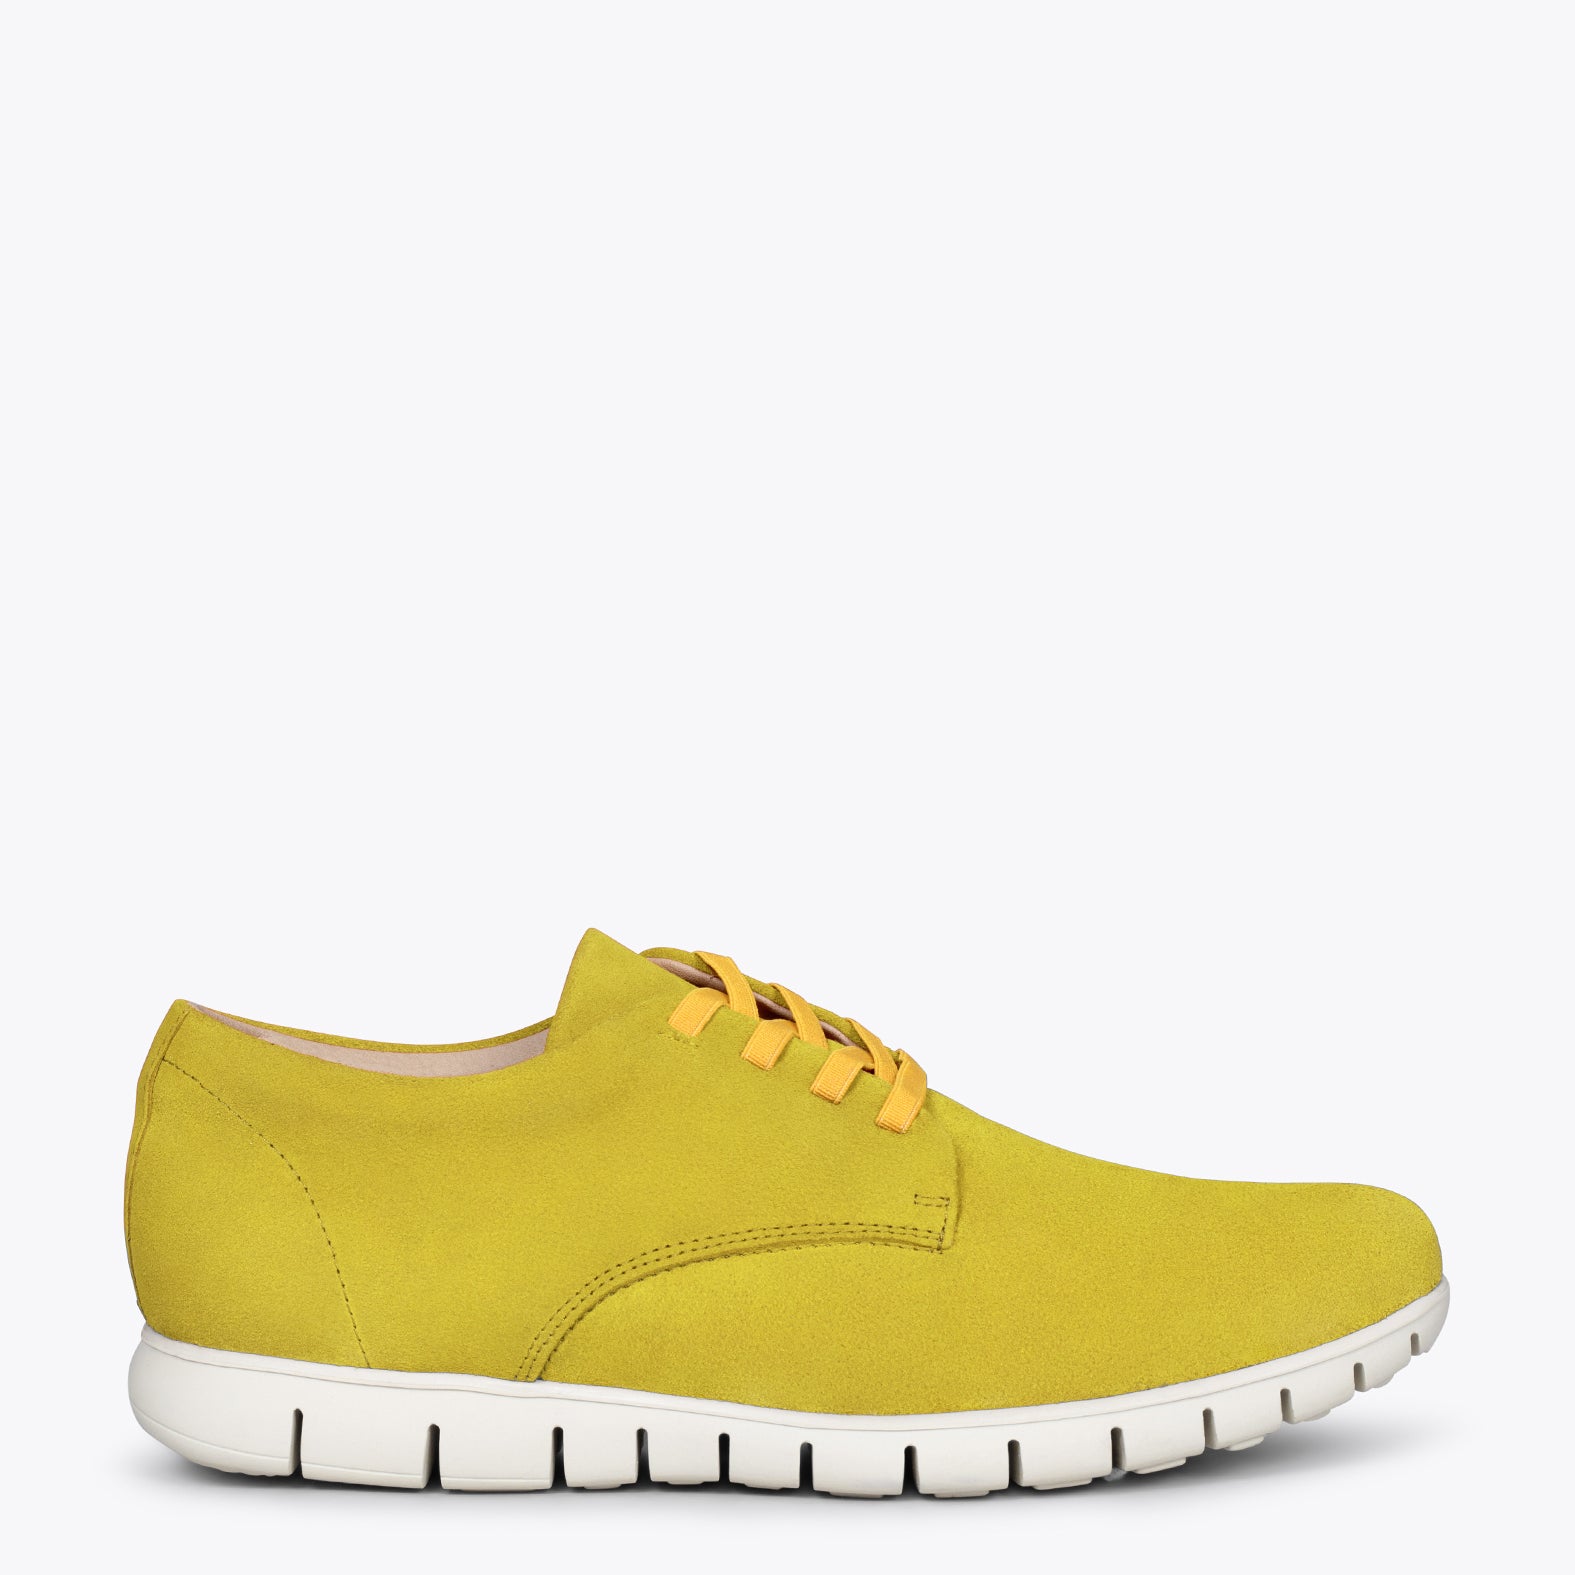 360 – YELLOW sport shoes for men